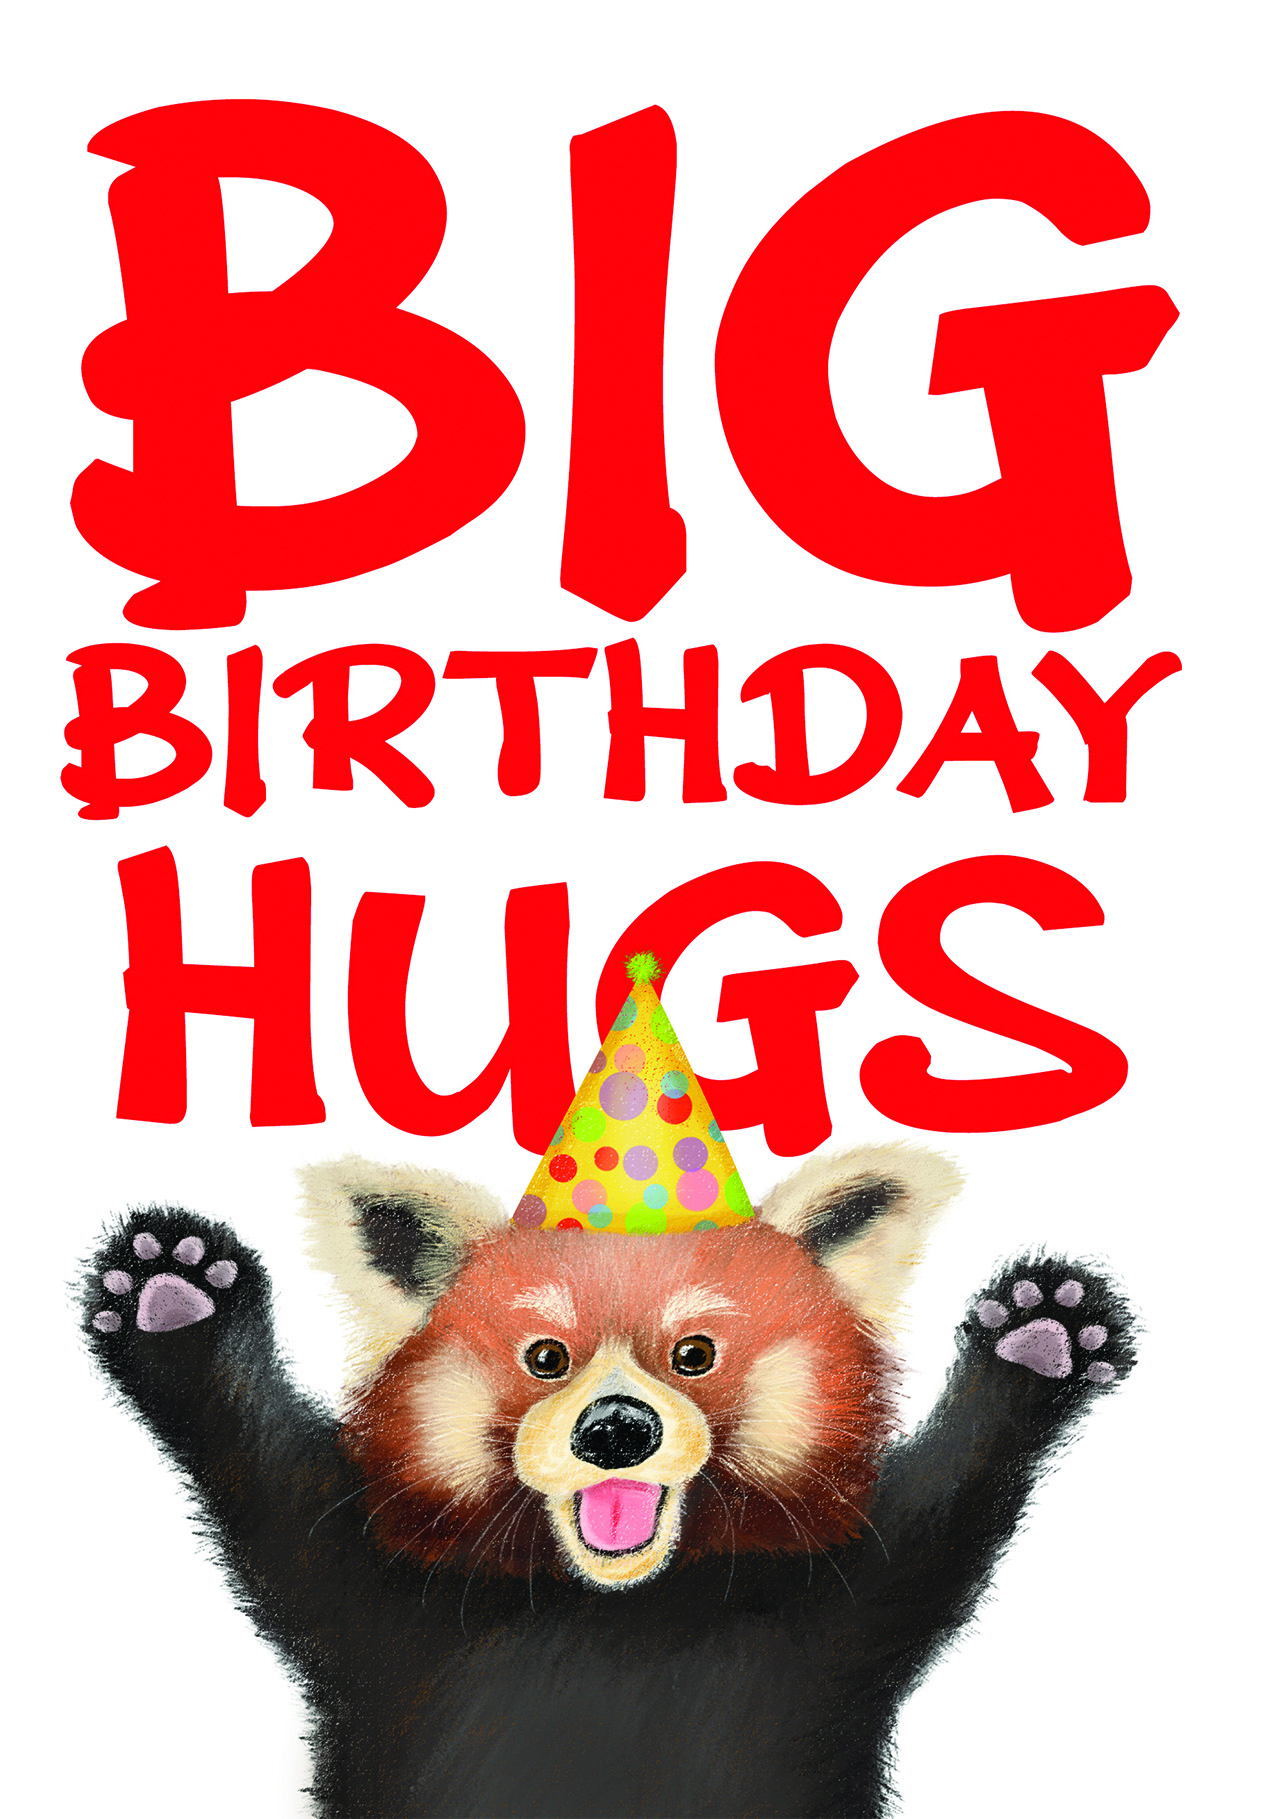 Birthday card with a red panda wearing a party hat holding his paws in the air, with Big Birthday Hugs written behind him